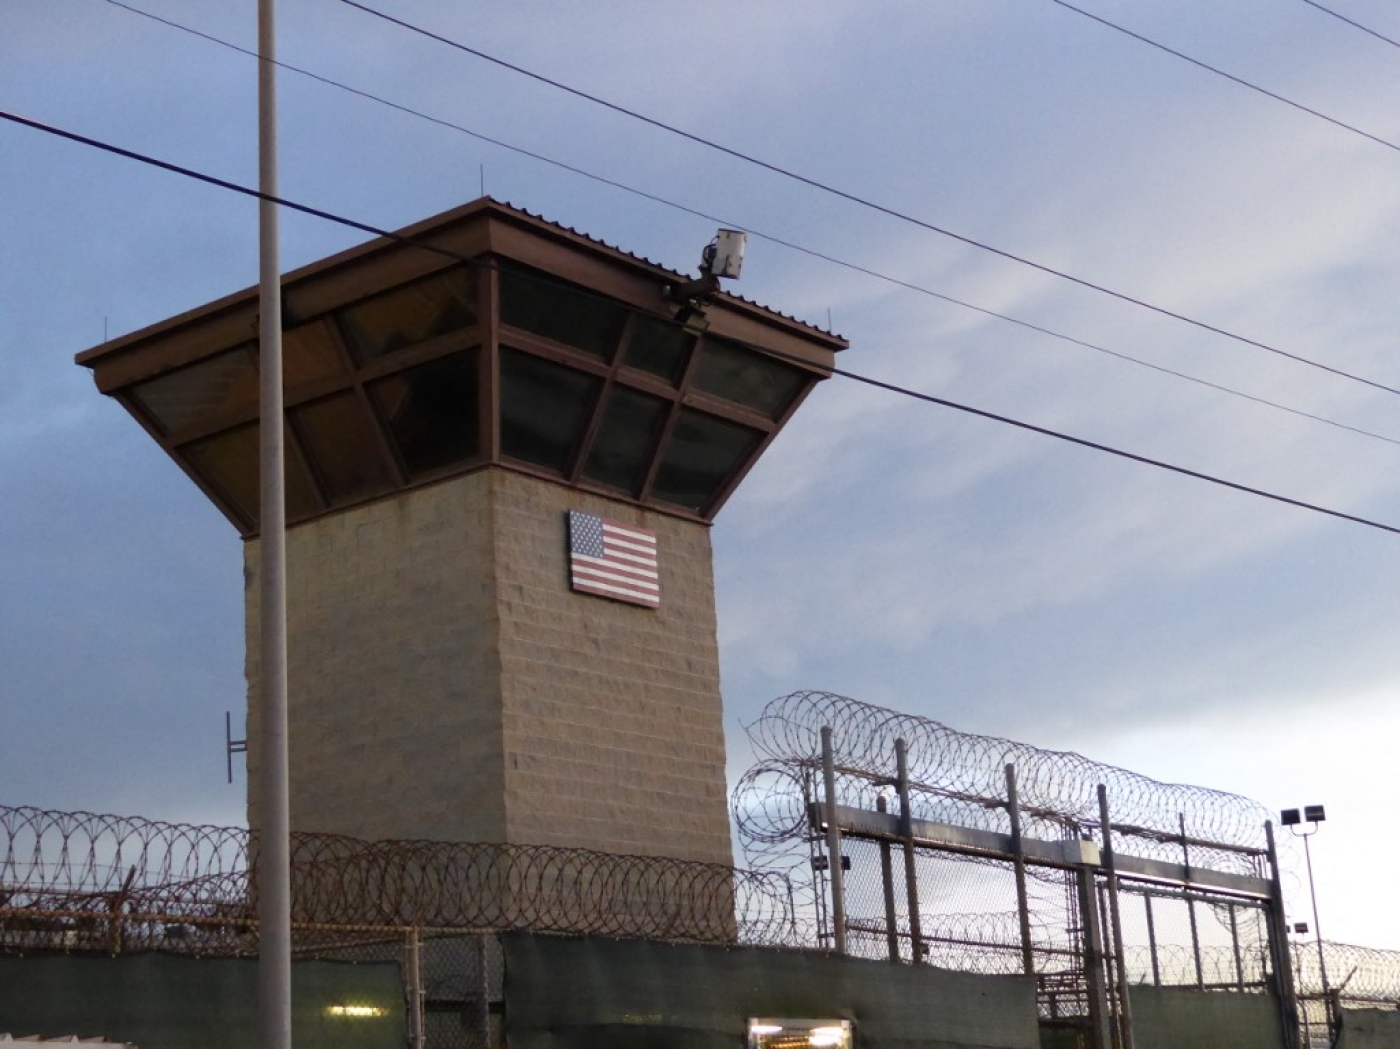 There are currently 40 men being held at the Guantanamo Bay prison camp.